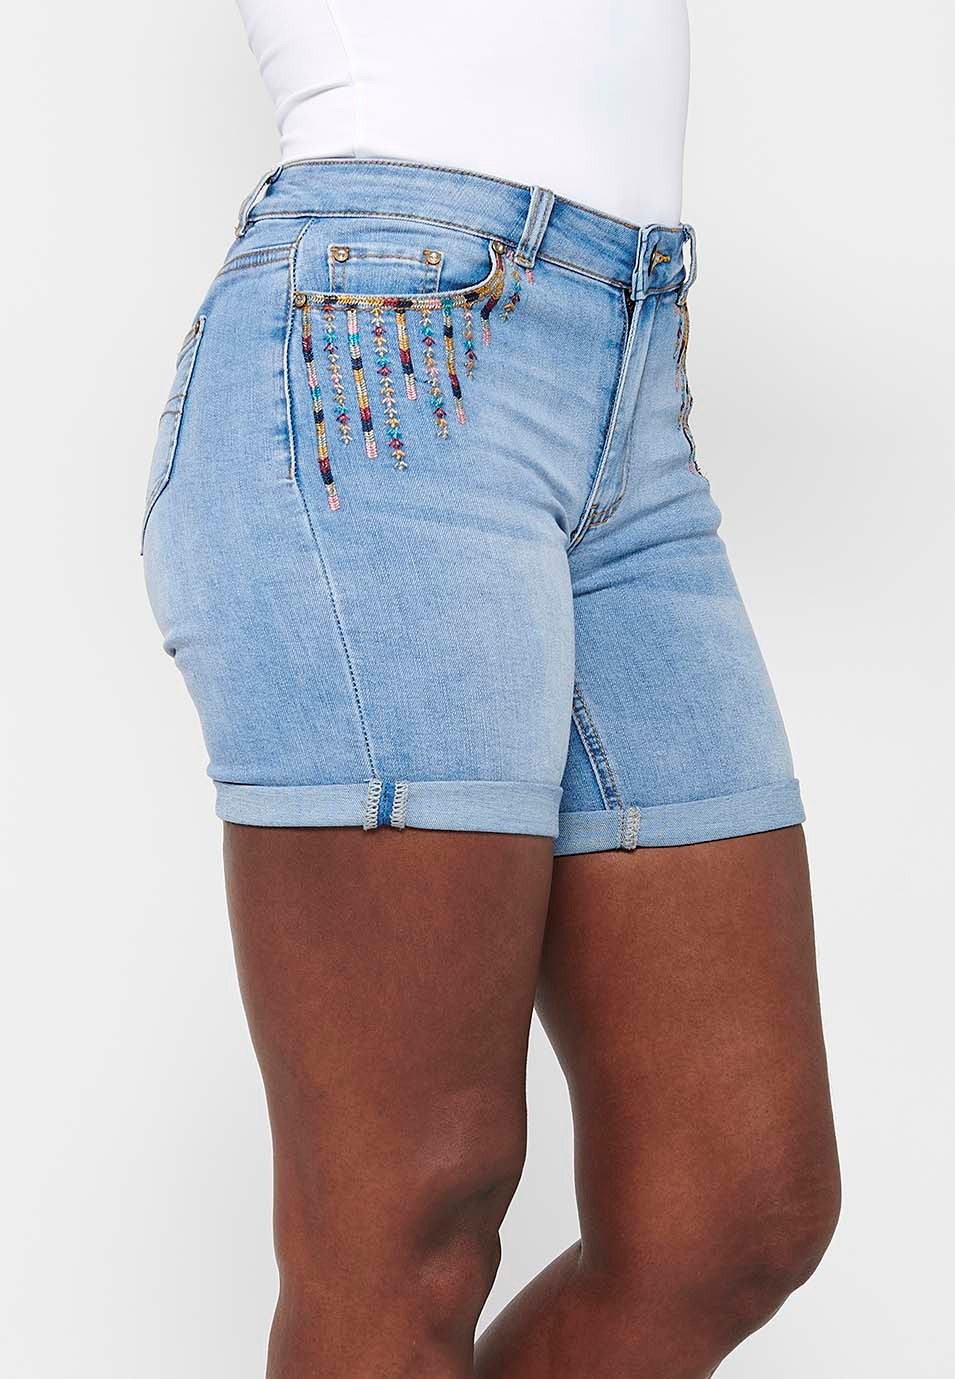 Shorts with cuffed finish with front zipper and button closure with embroidered details in Blue for Women 5